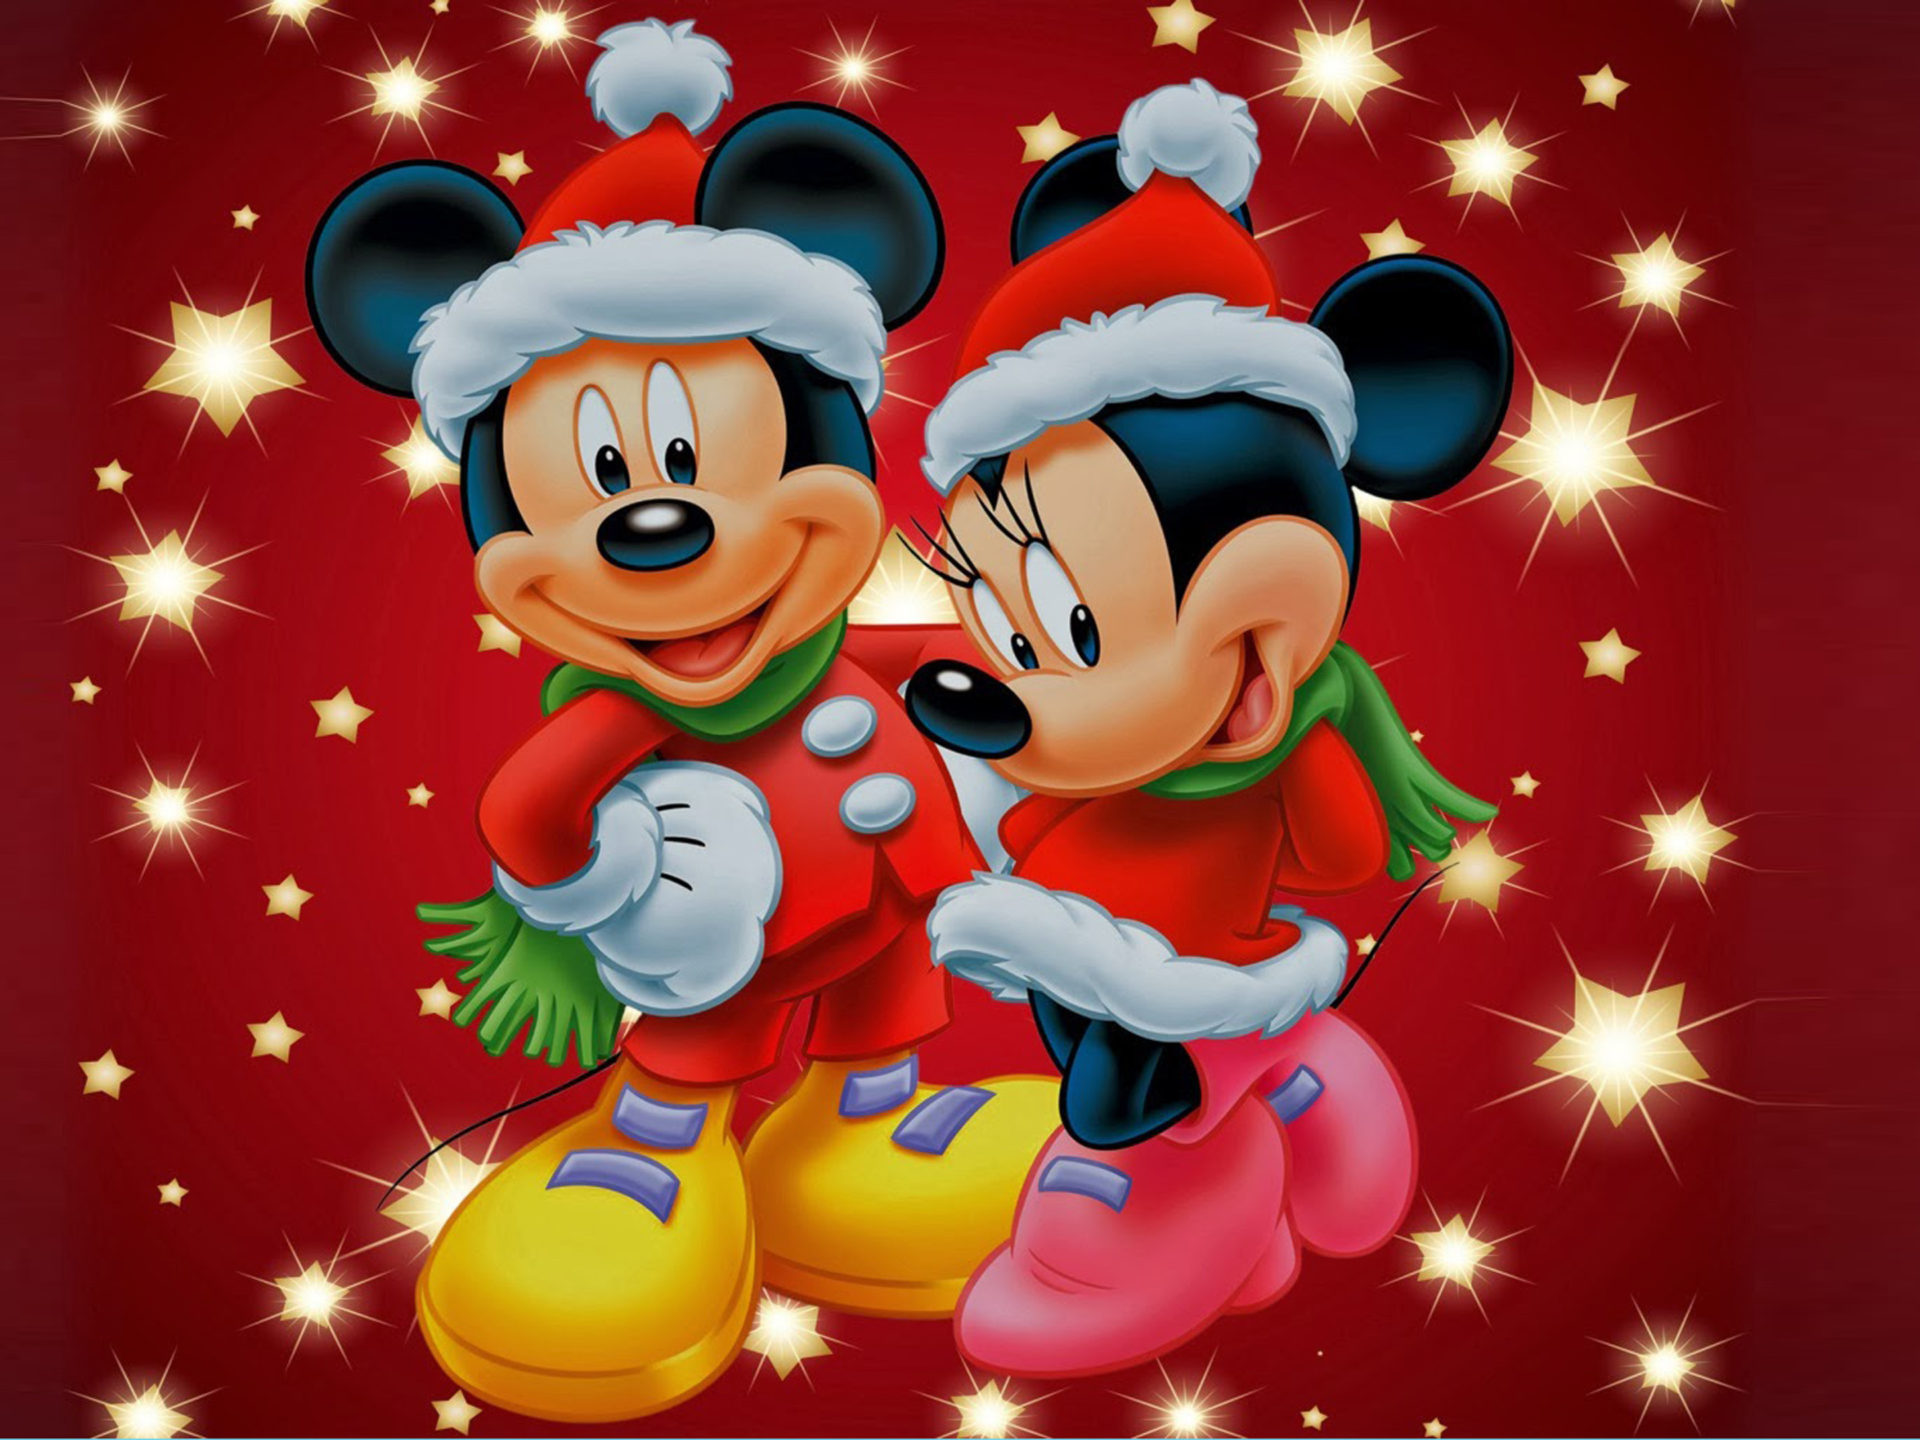 Mickey And Minnie Mouse Christmas Theme Desktop Wallpaper Hd For 1920x1440